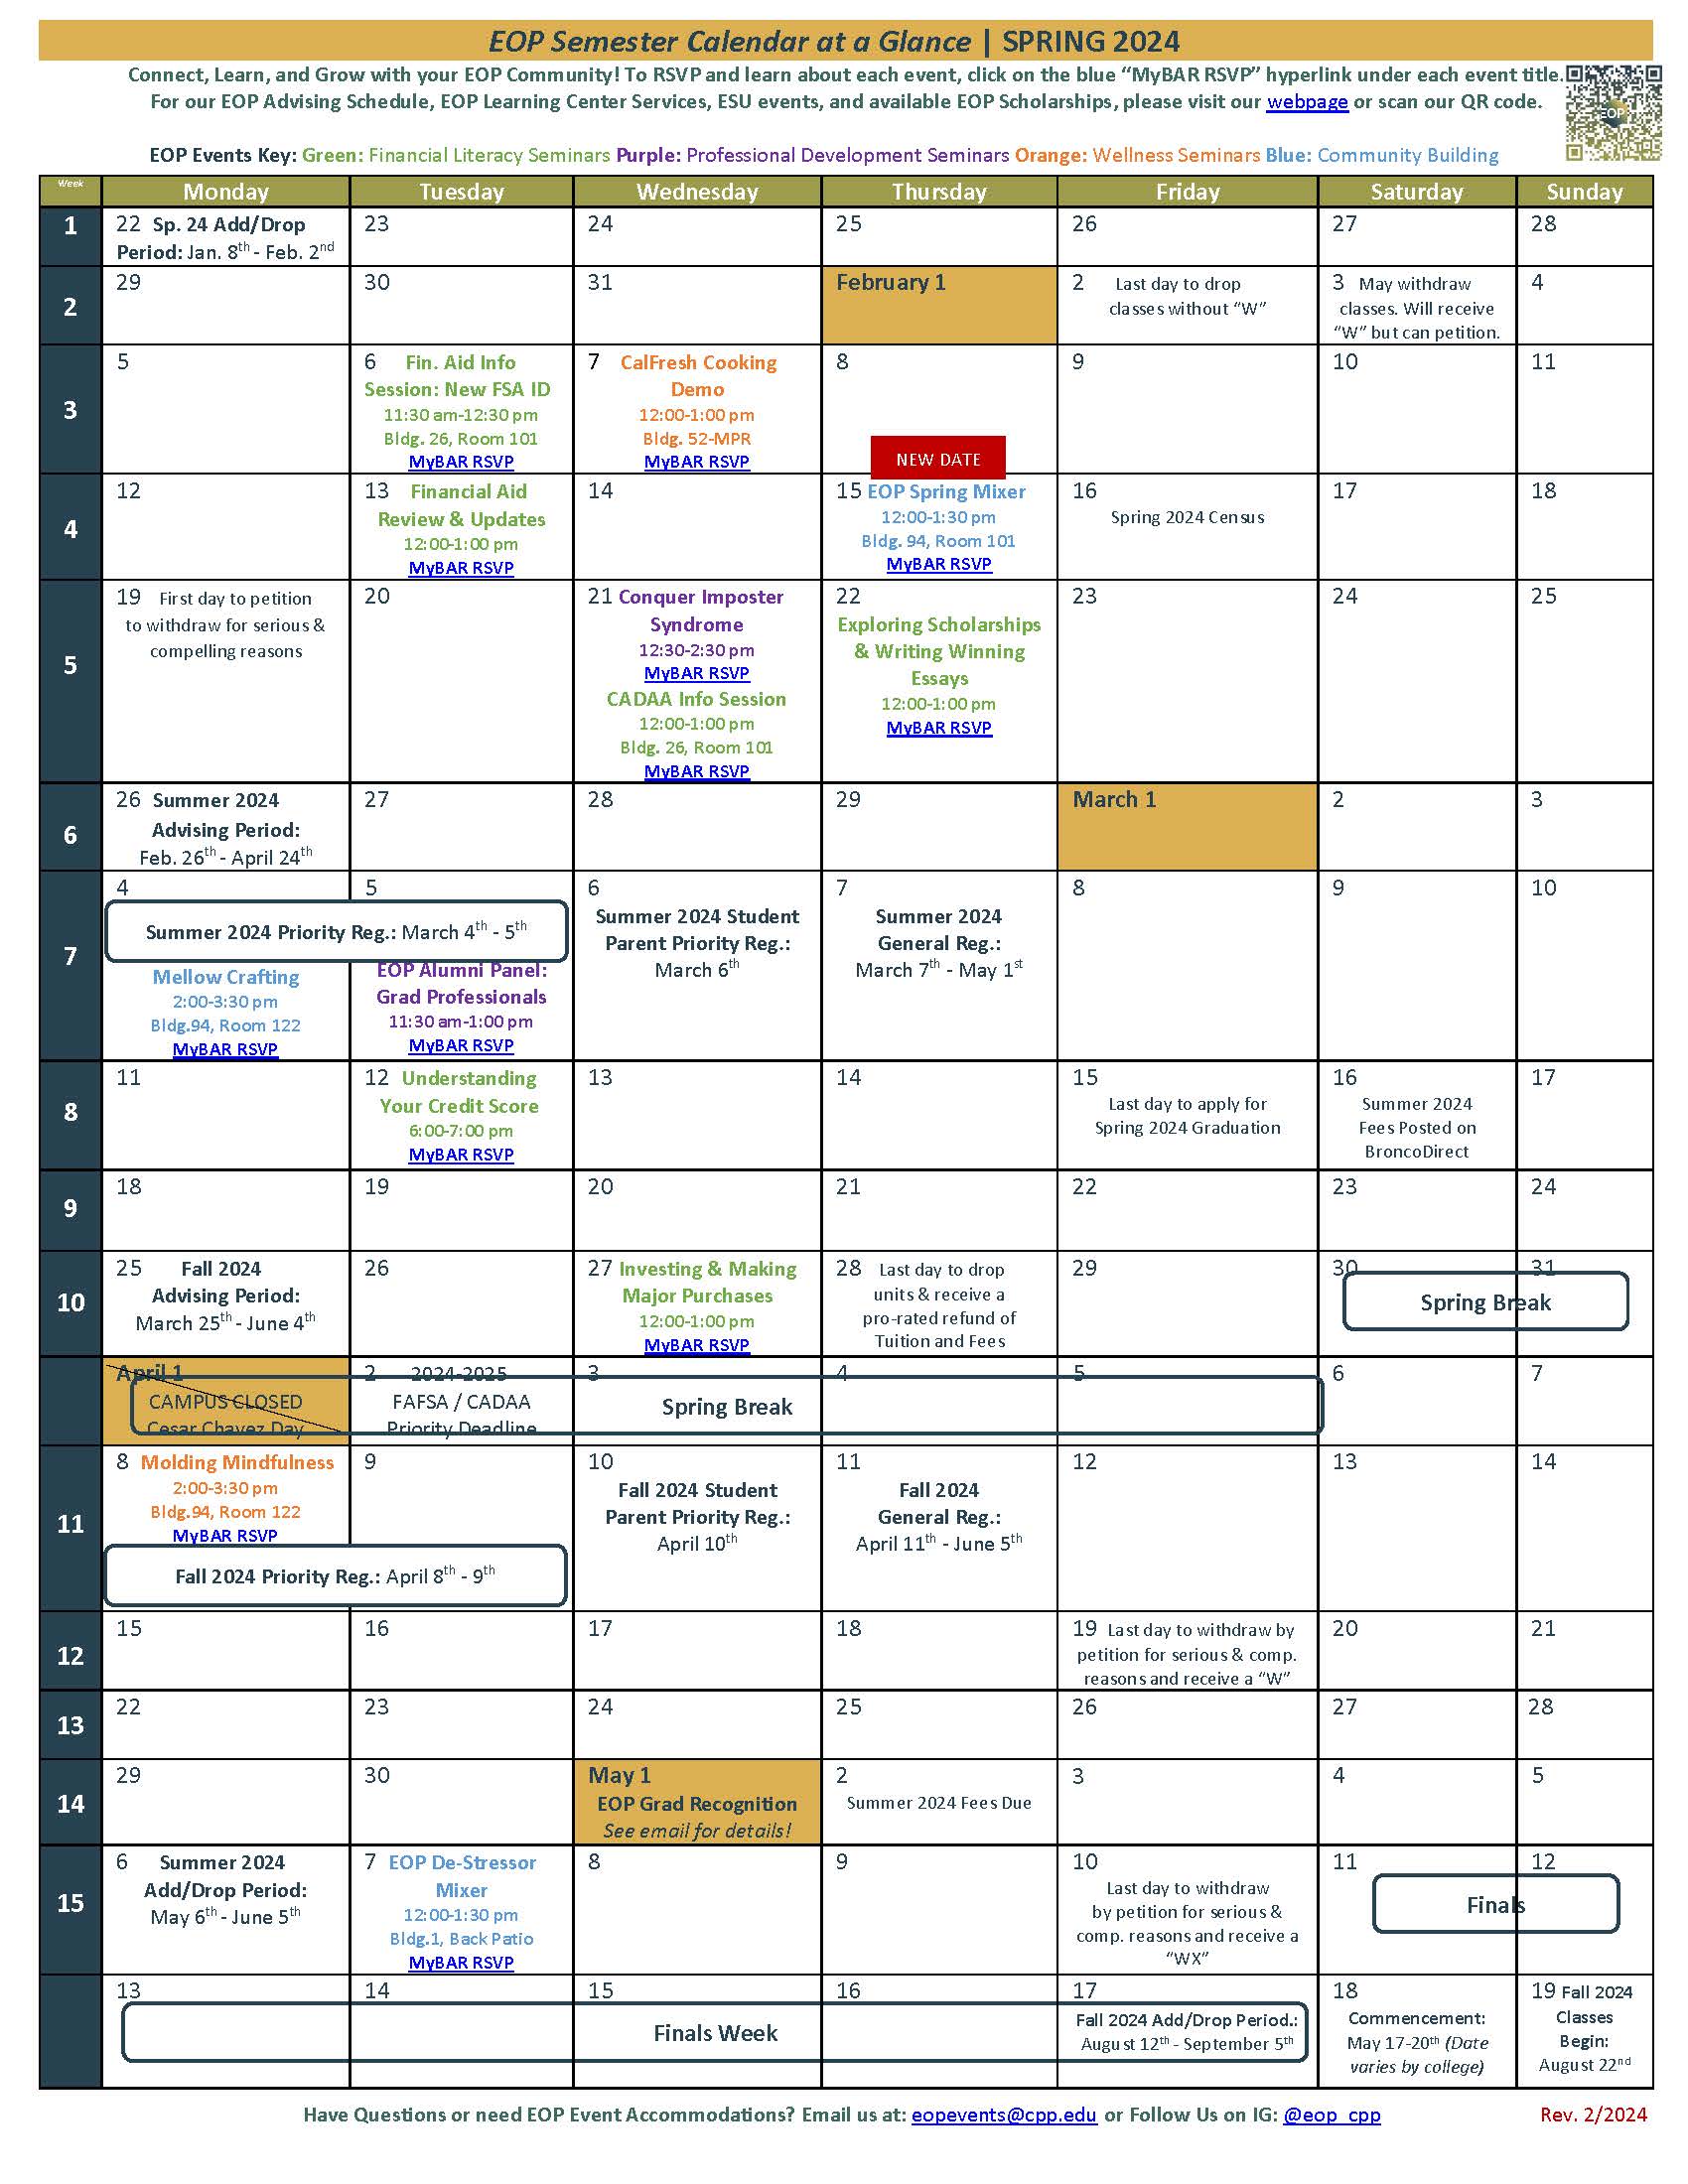 Image of the Calendar at a Glance Spring 2024 image